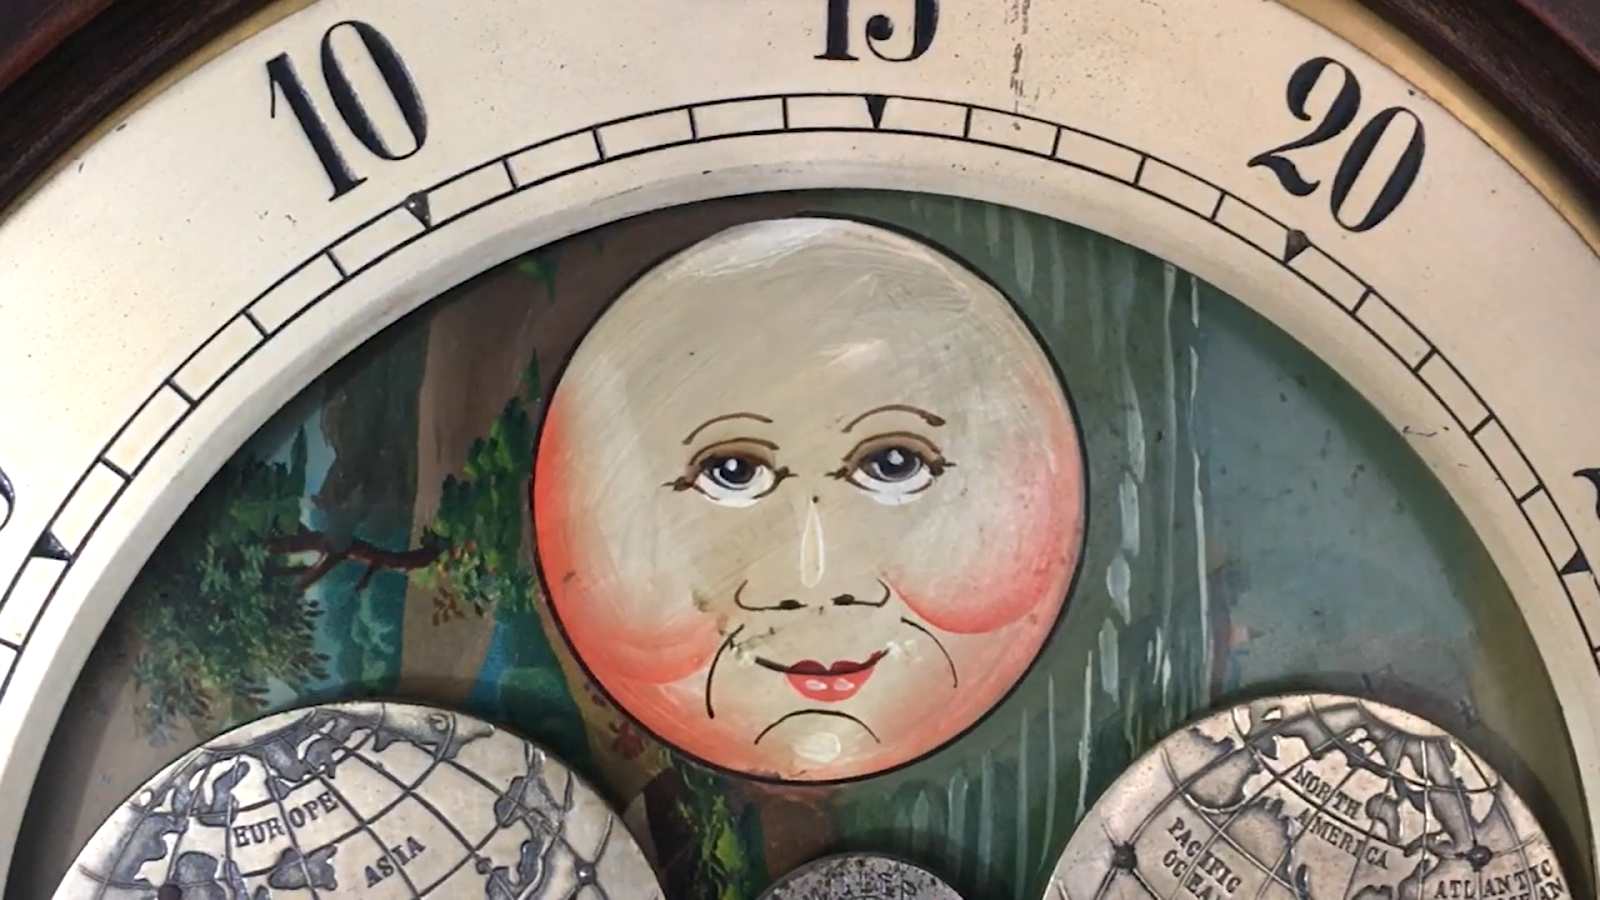 A vintage clock displays a painted moon with a face, with small illustrations of a forest landscape and a map of Europe and Asia